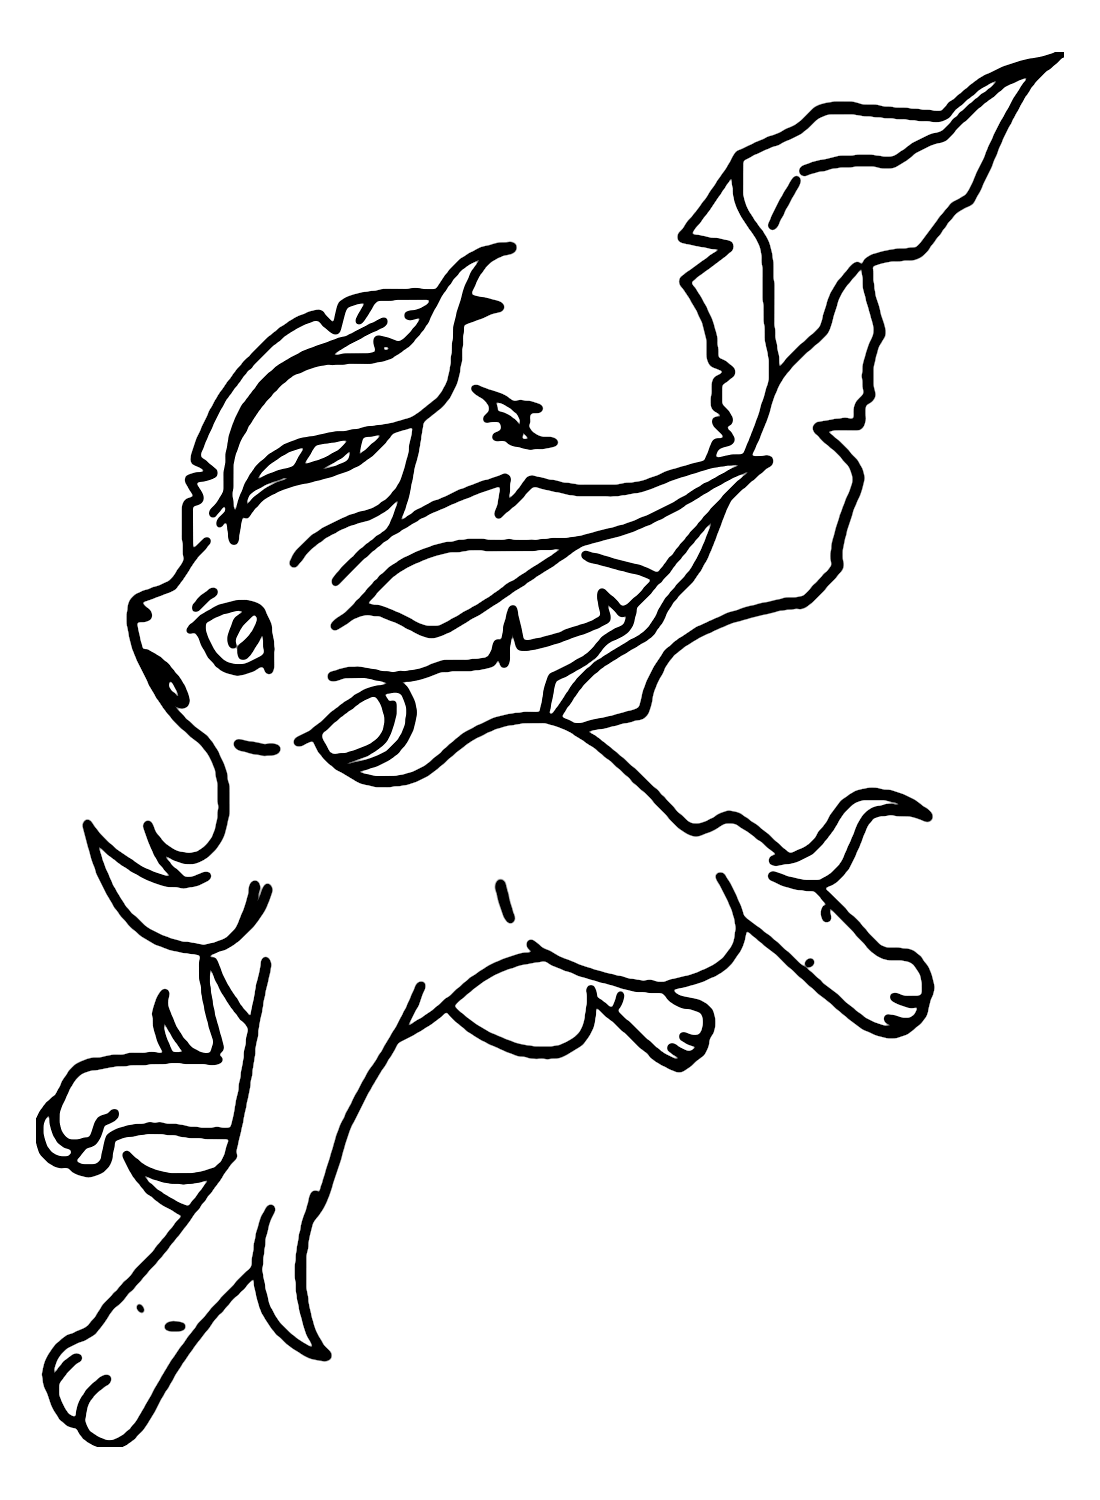 Leafeon coloring pages printable for free download